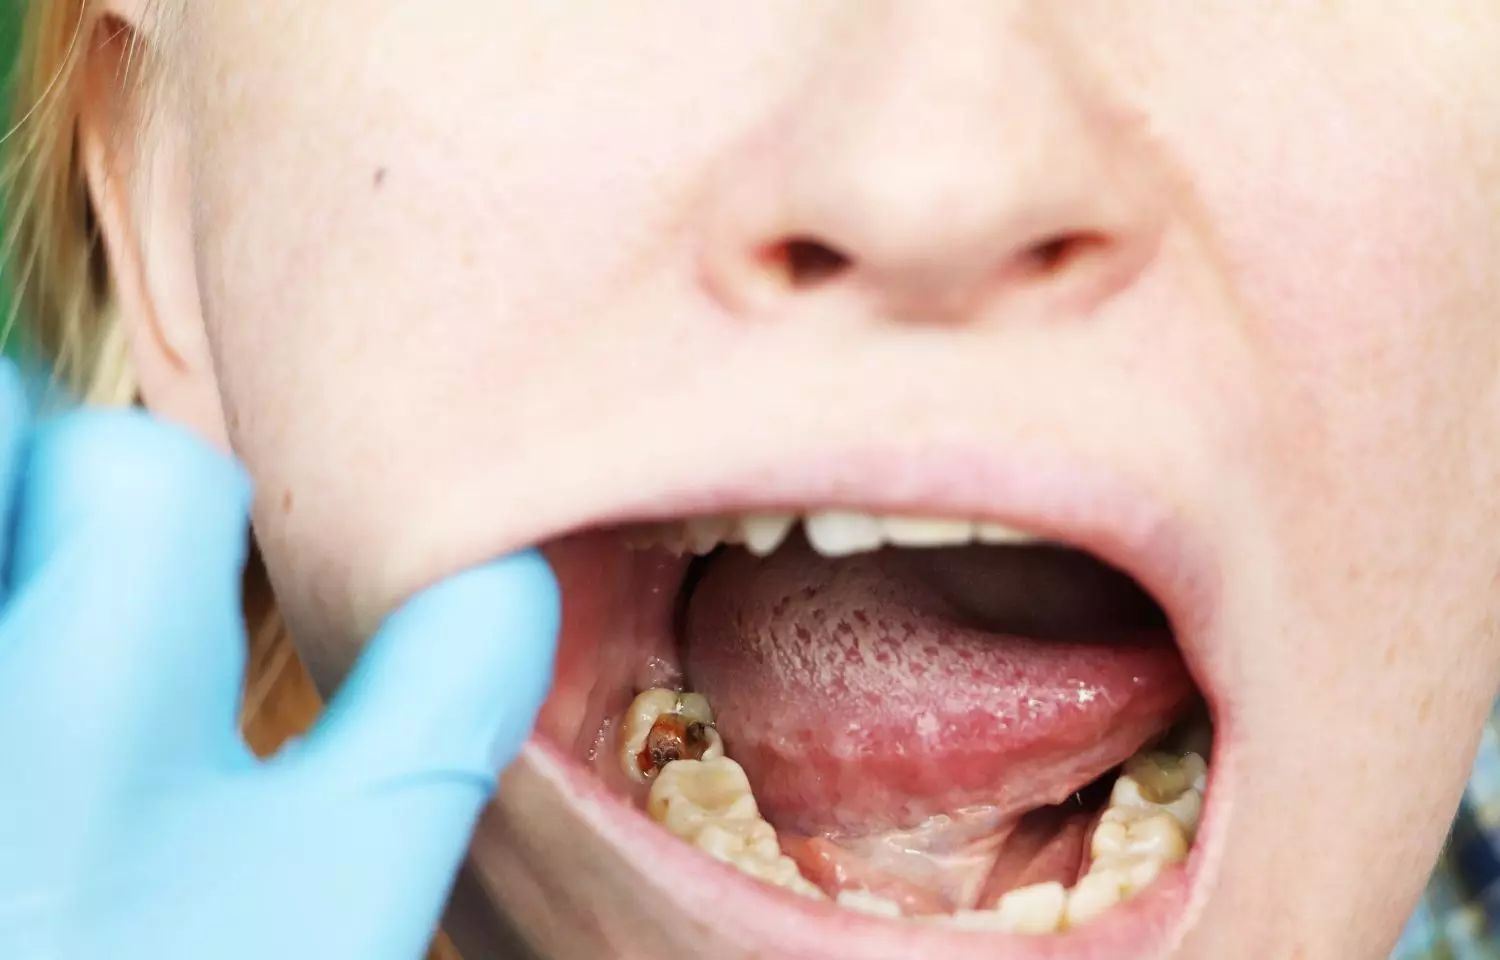 Superorganisms formed by bacterial and fungal partnership can colonise teeth and  cause cavities